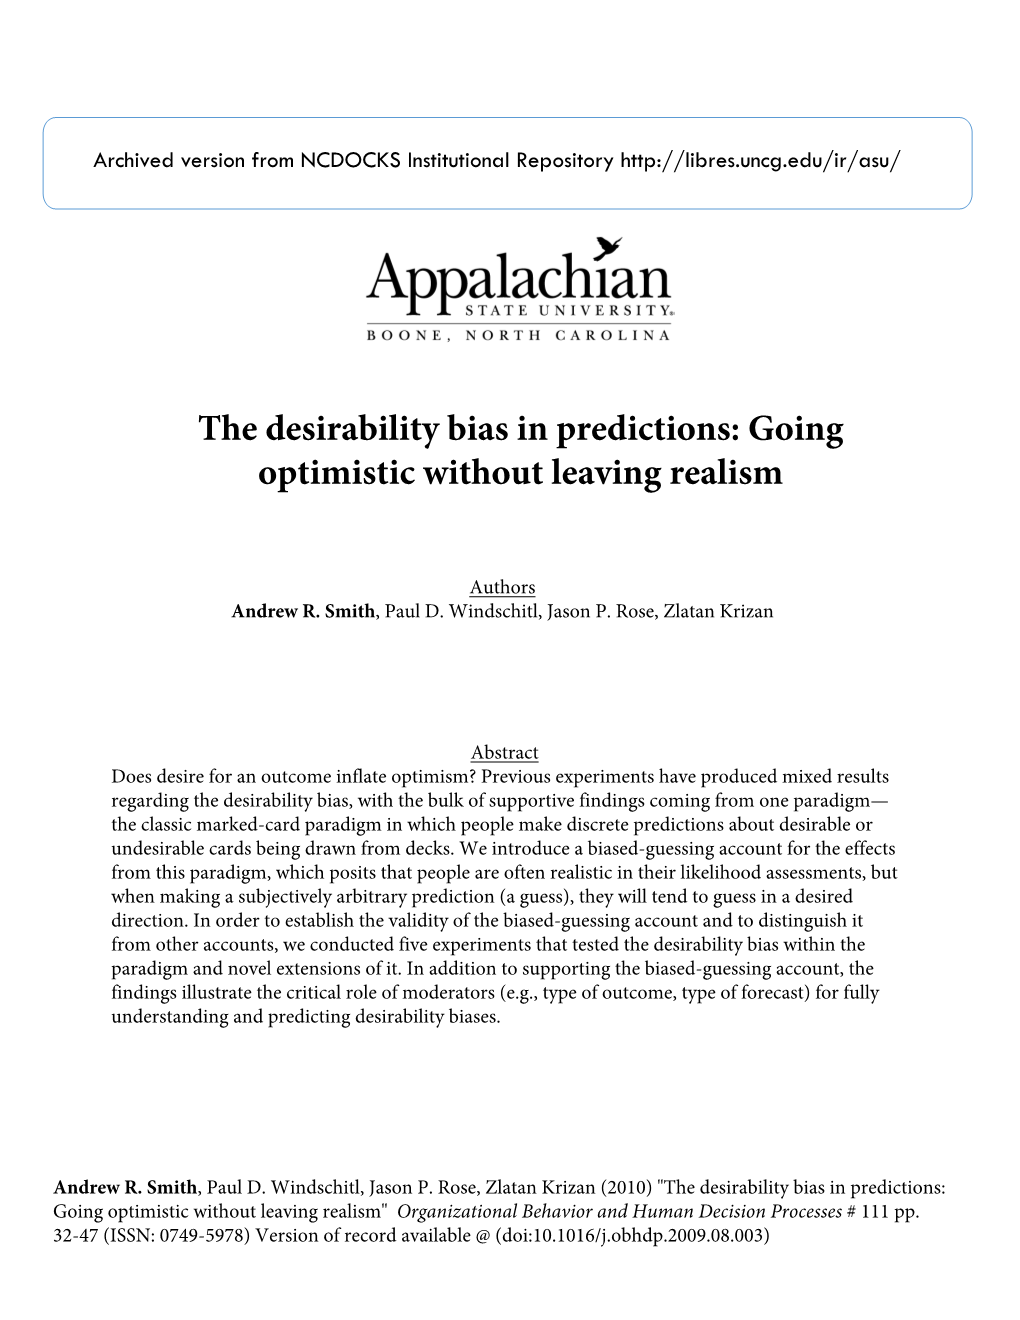 The Desirability Bias in Predictions: Going Optimistic Without Leaving Realism